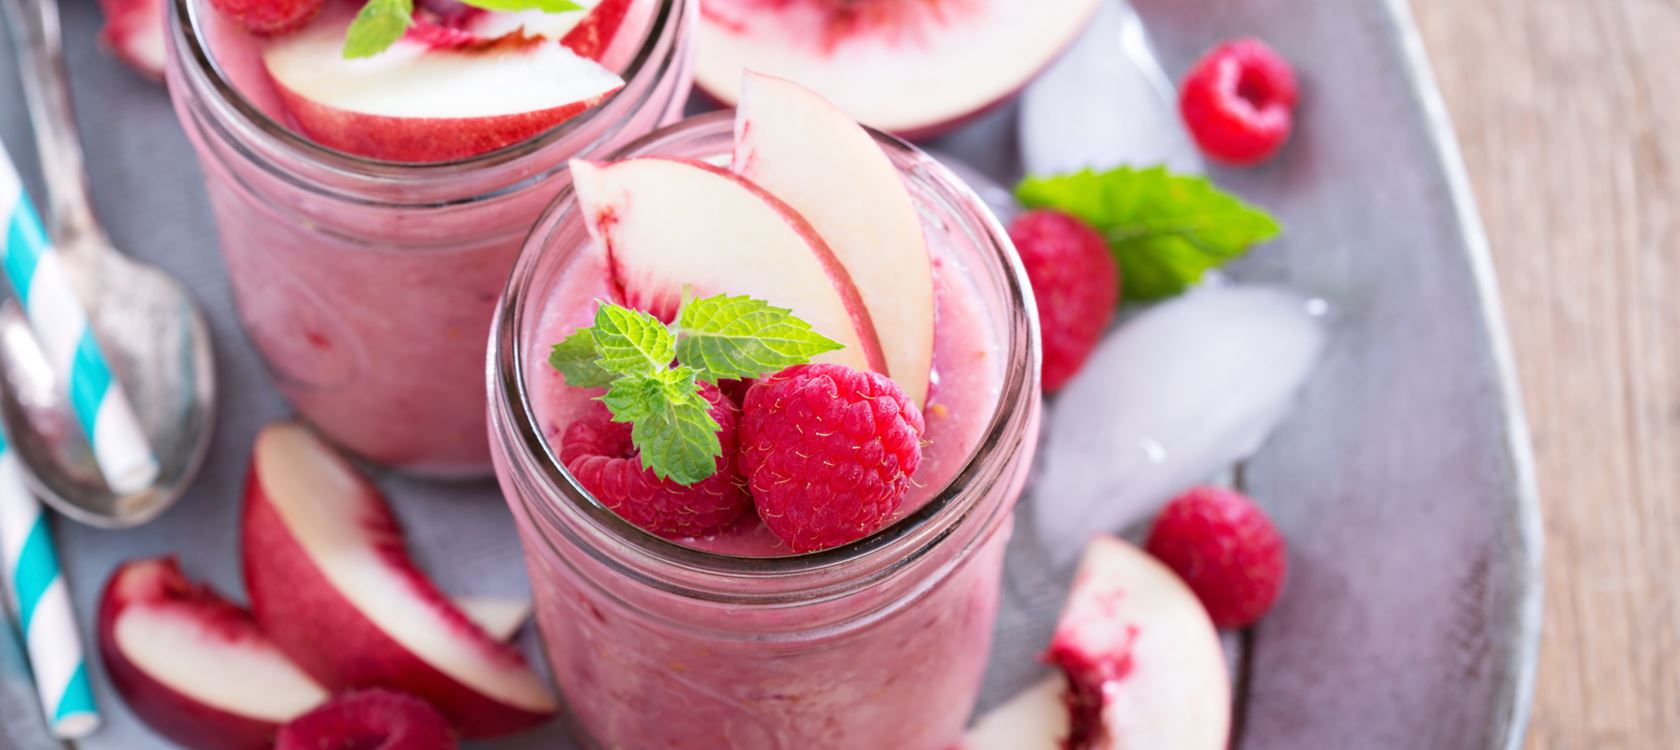 Get inspired by Arla's range of healthy smoothie recipes | Arla UK